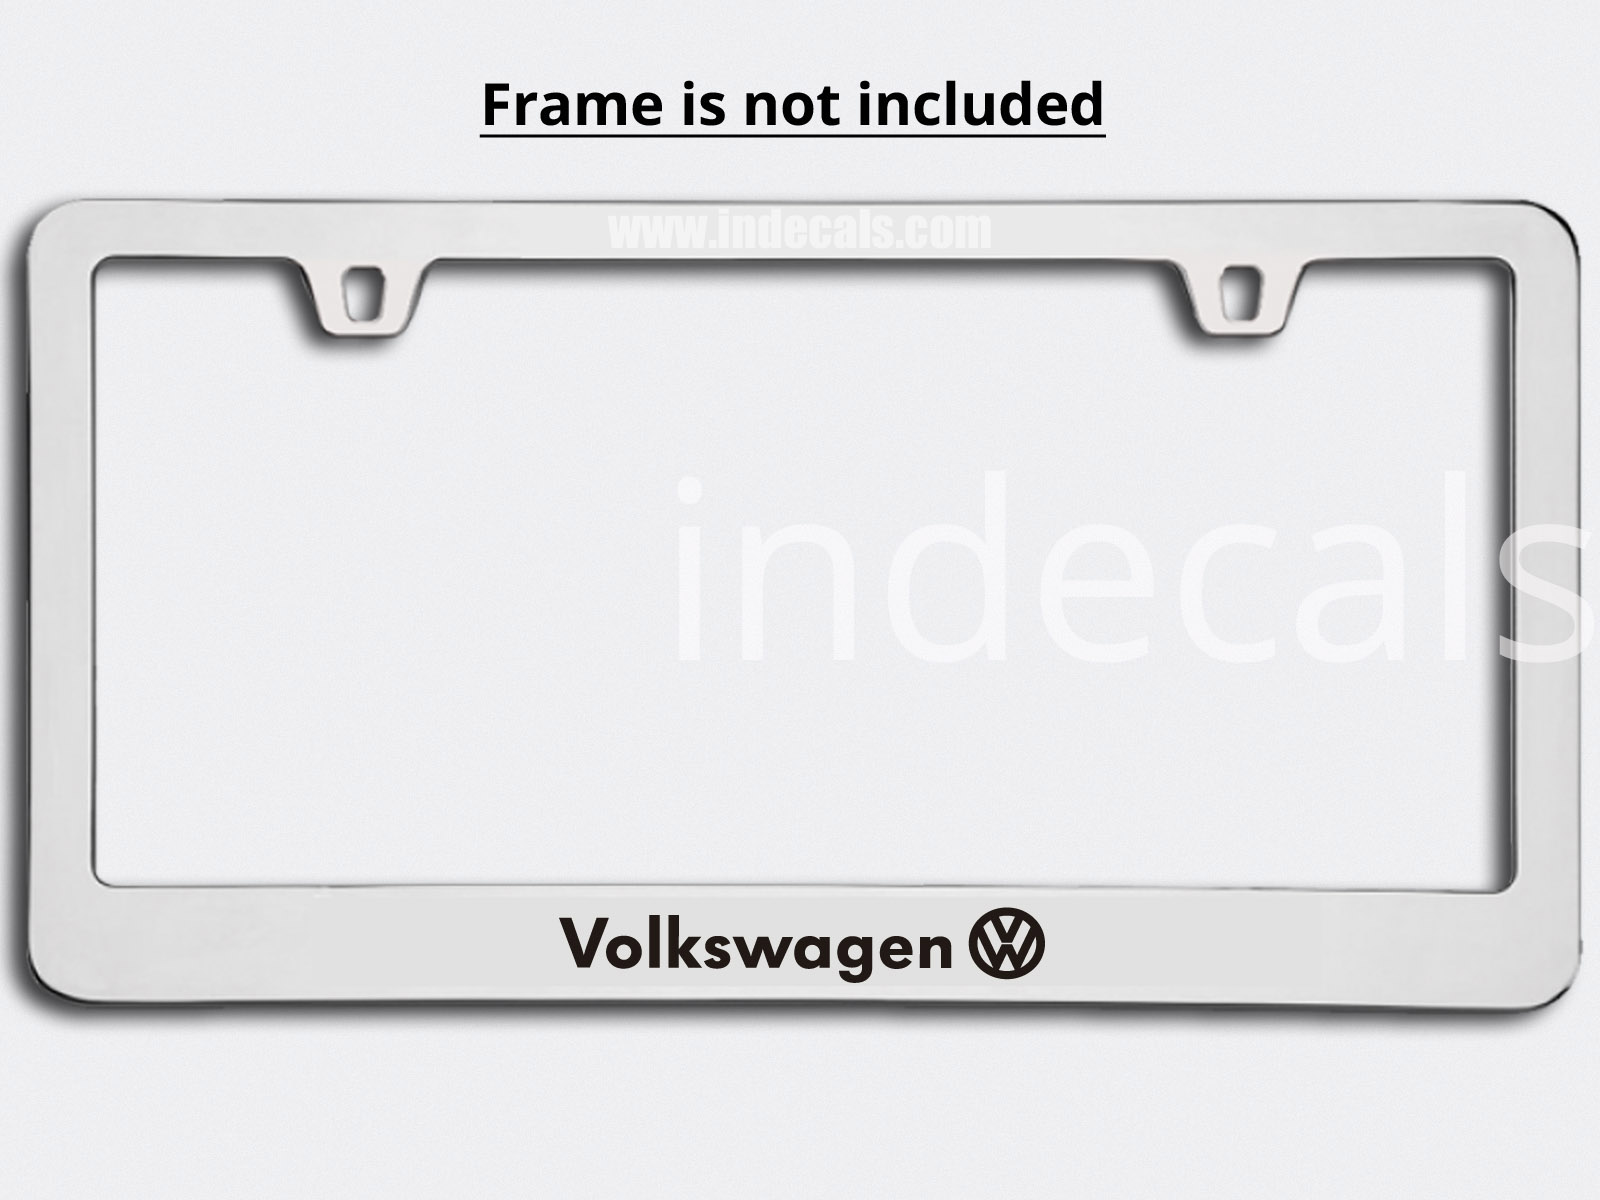 3 x Volkswagen Stickers for Plate Frame - Black